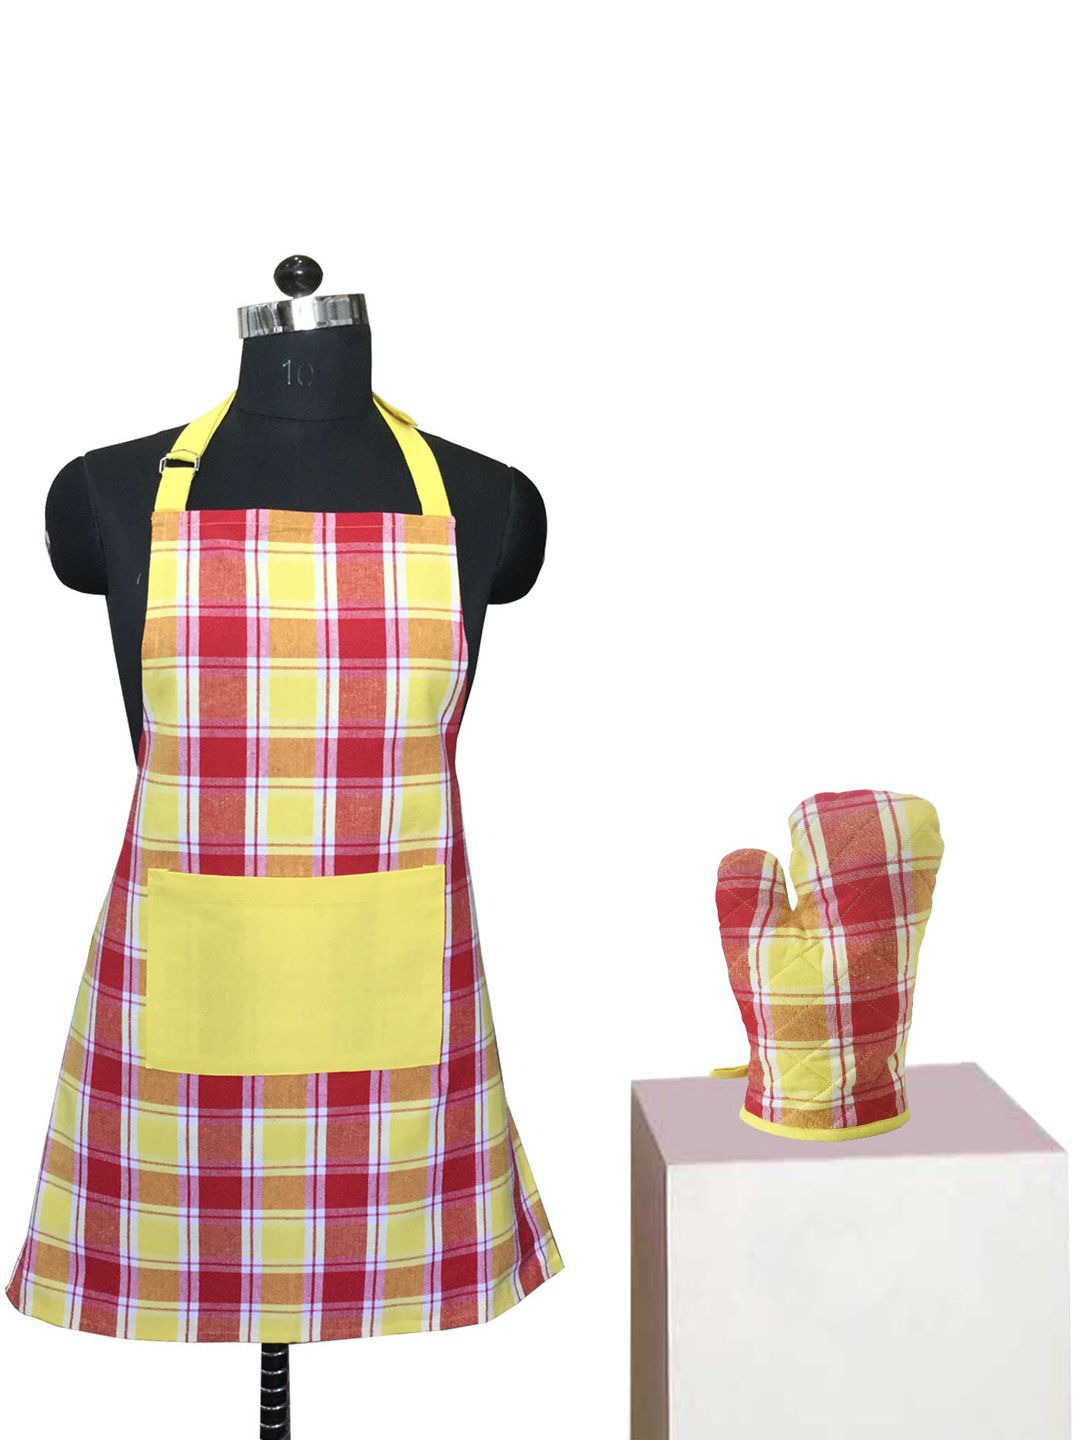 Lushomes Red & Yellow Kitchen Apron with Oven Gloves Price in India